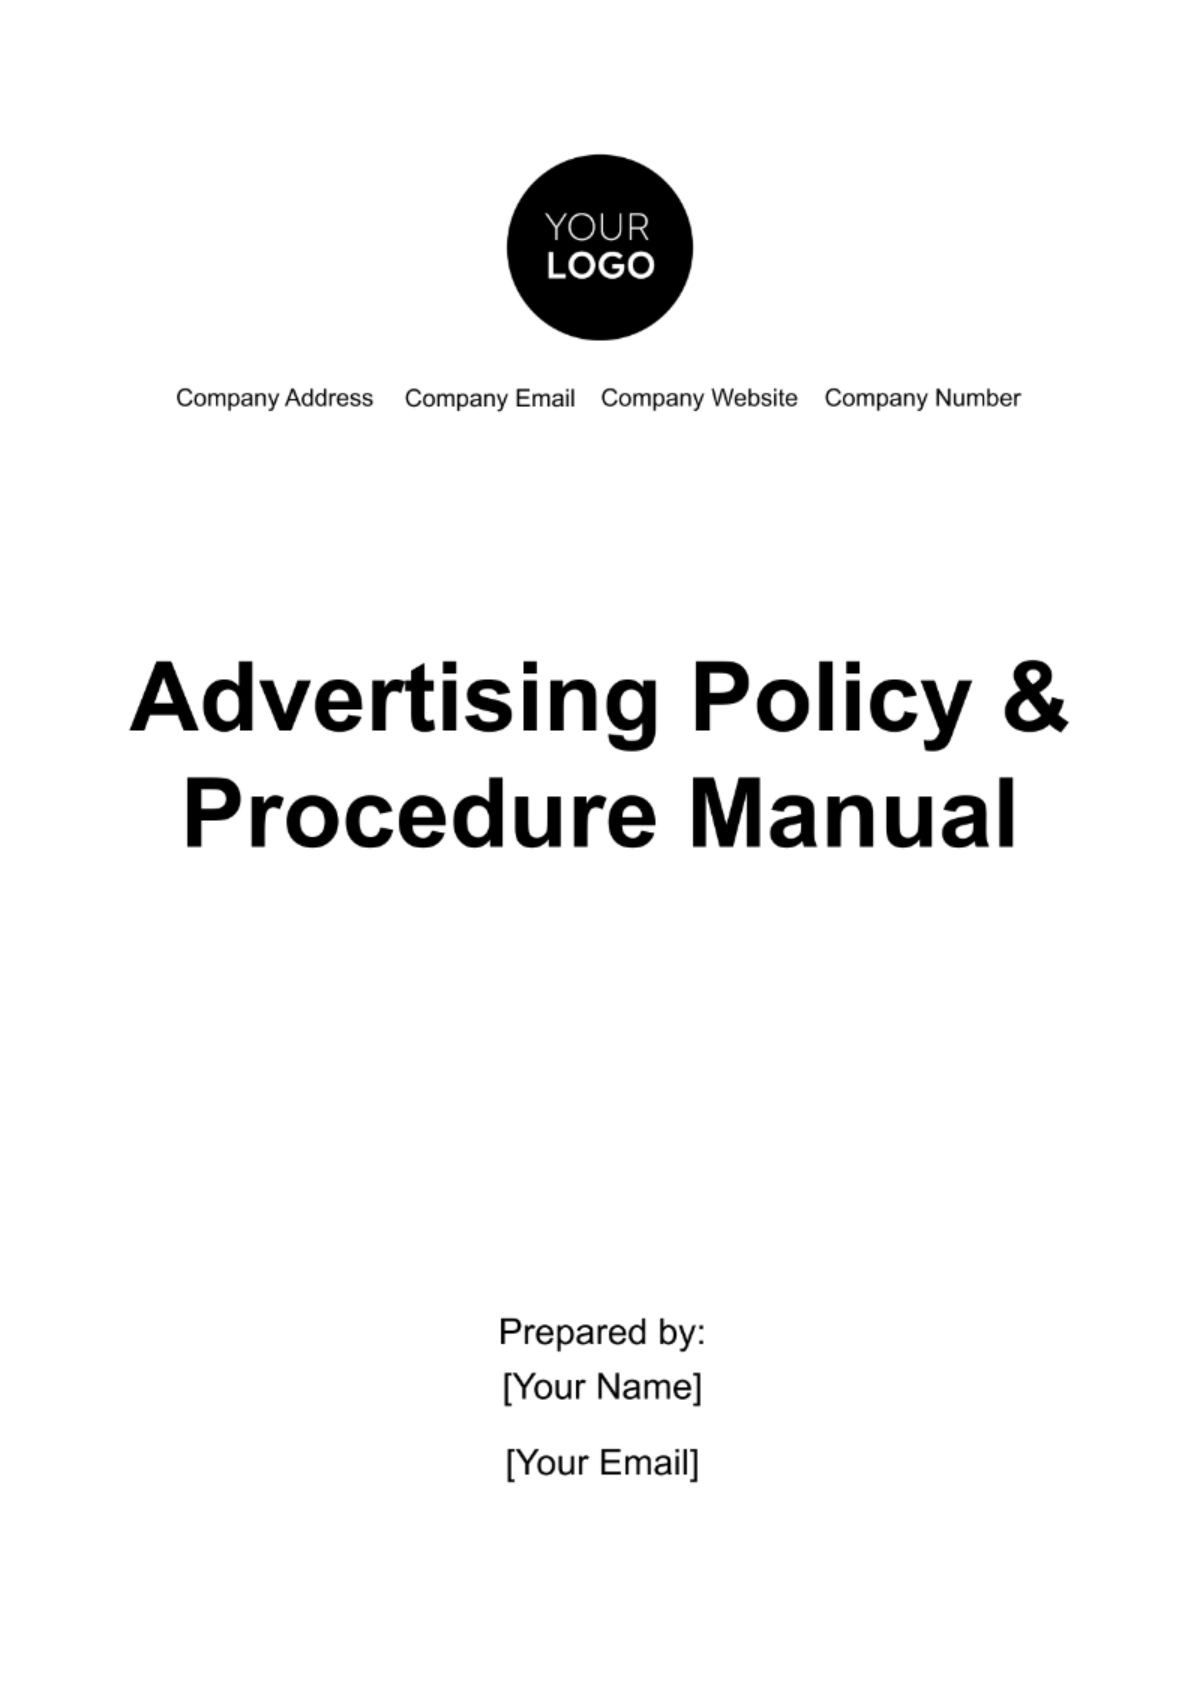 Free Advertising Policy & Procedure Manual Template